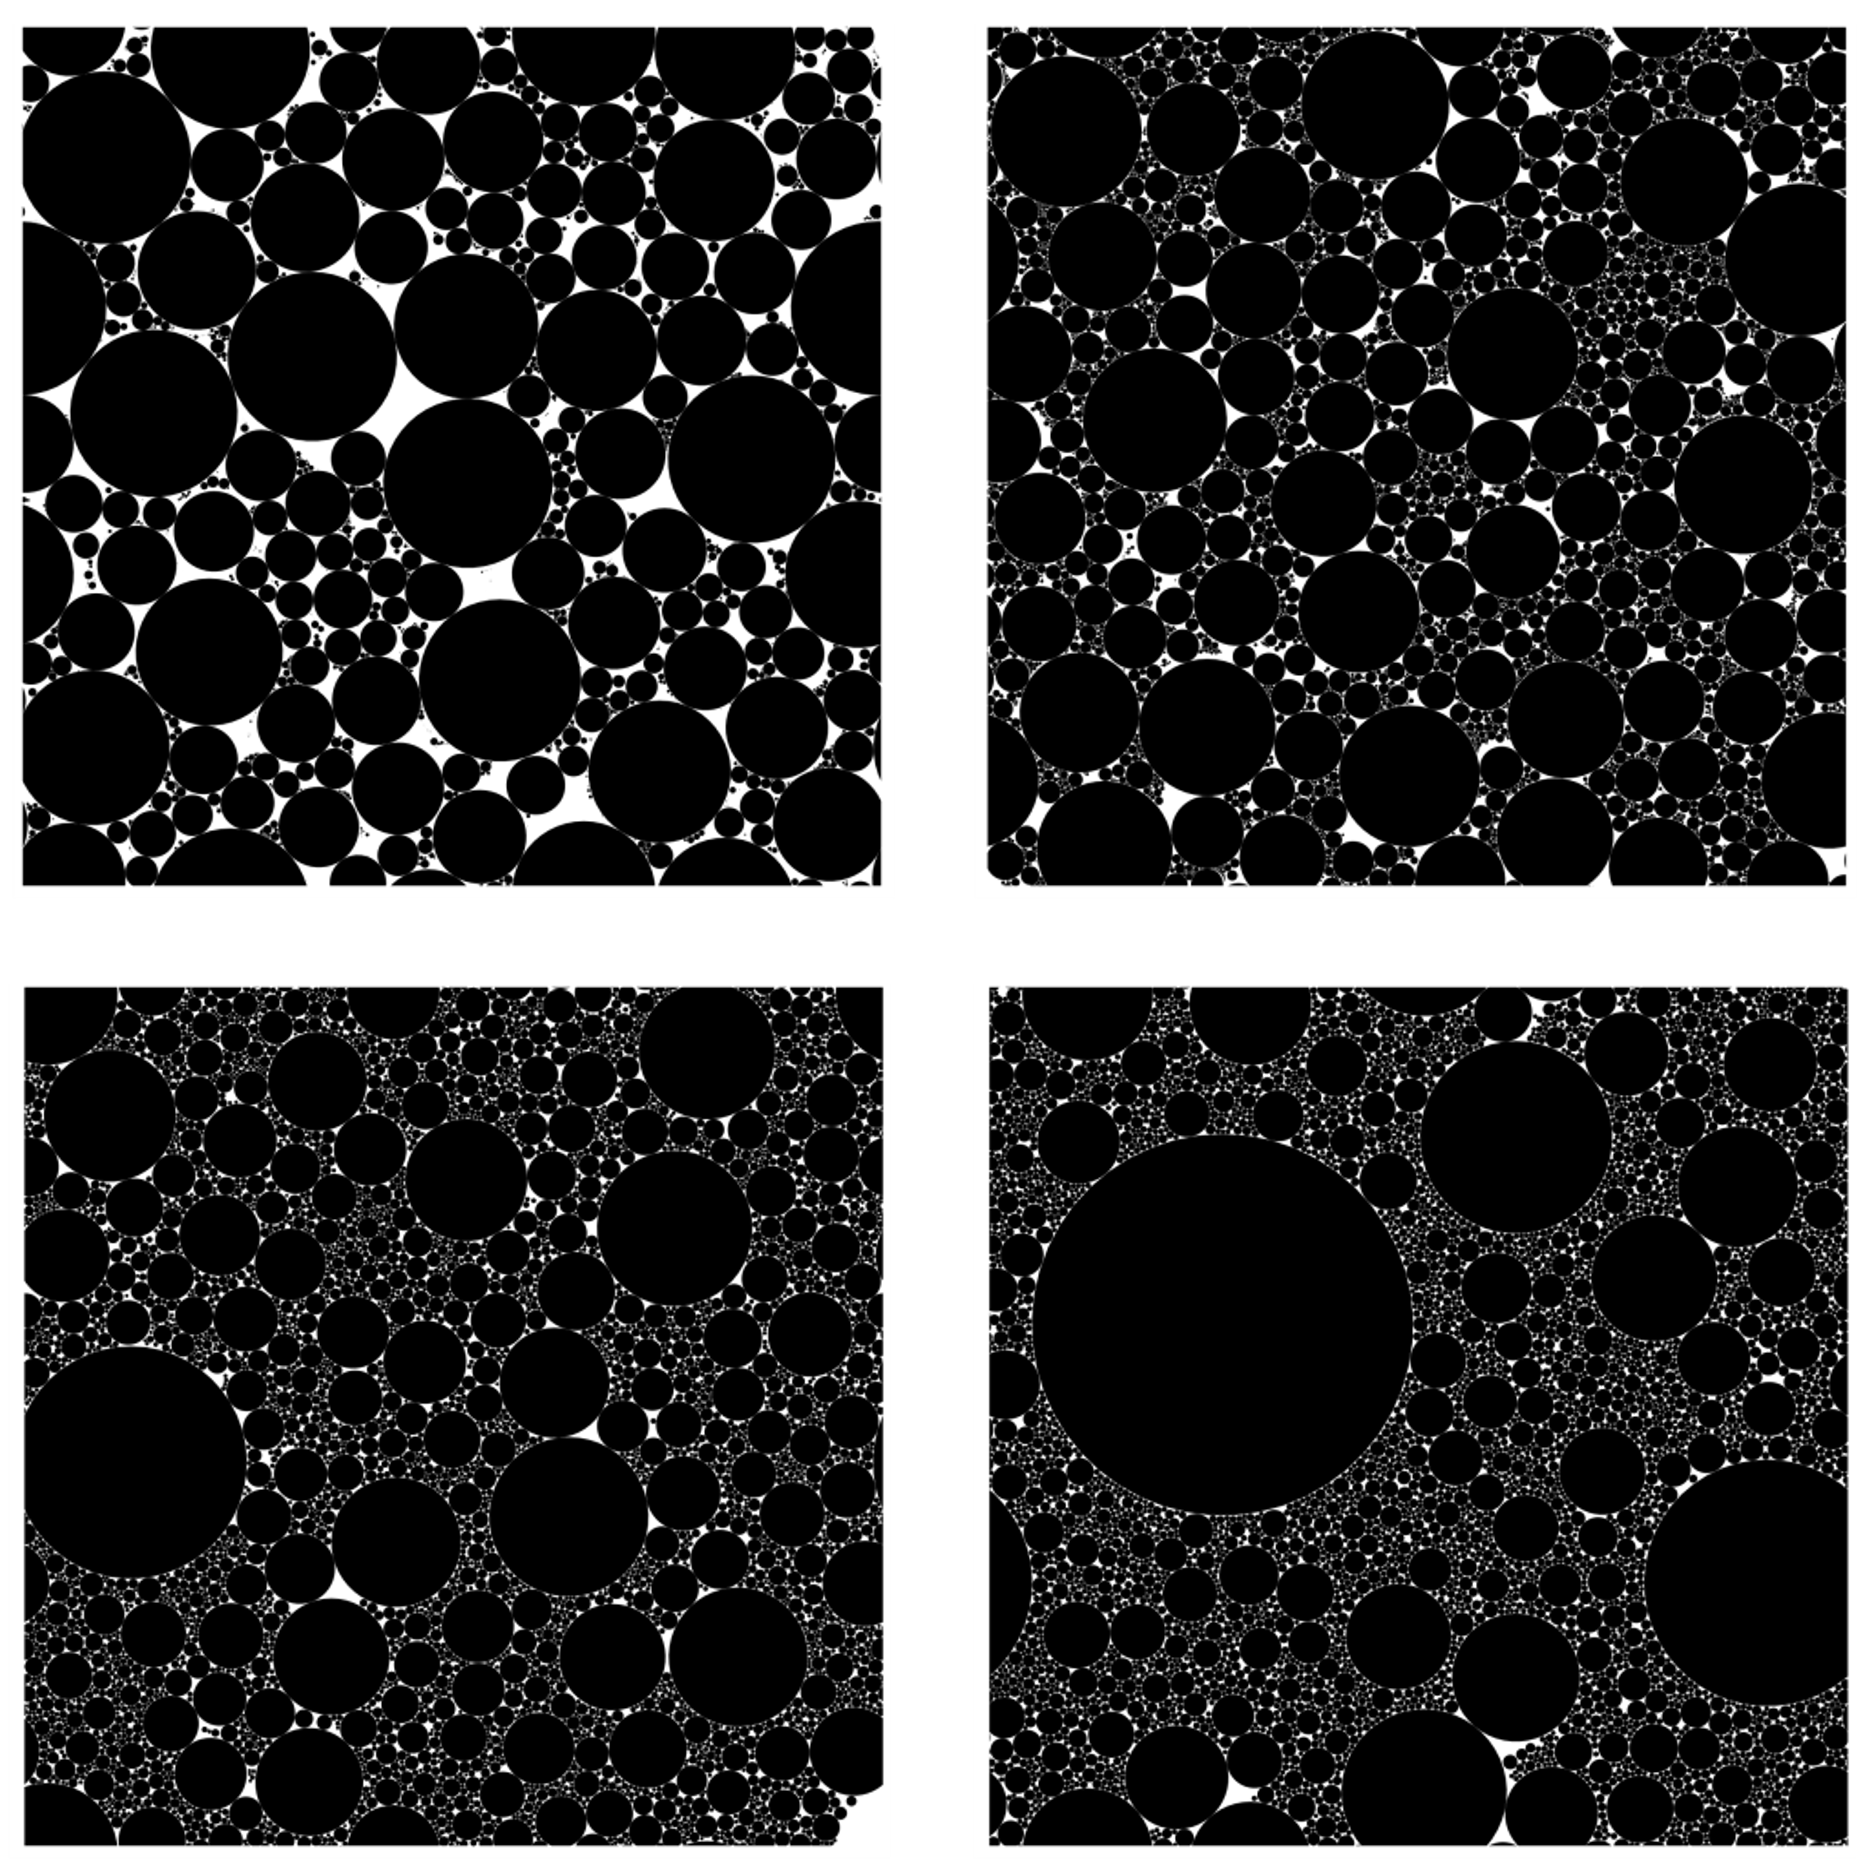 White circles on a black background.